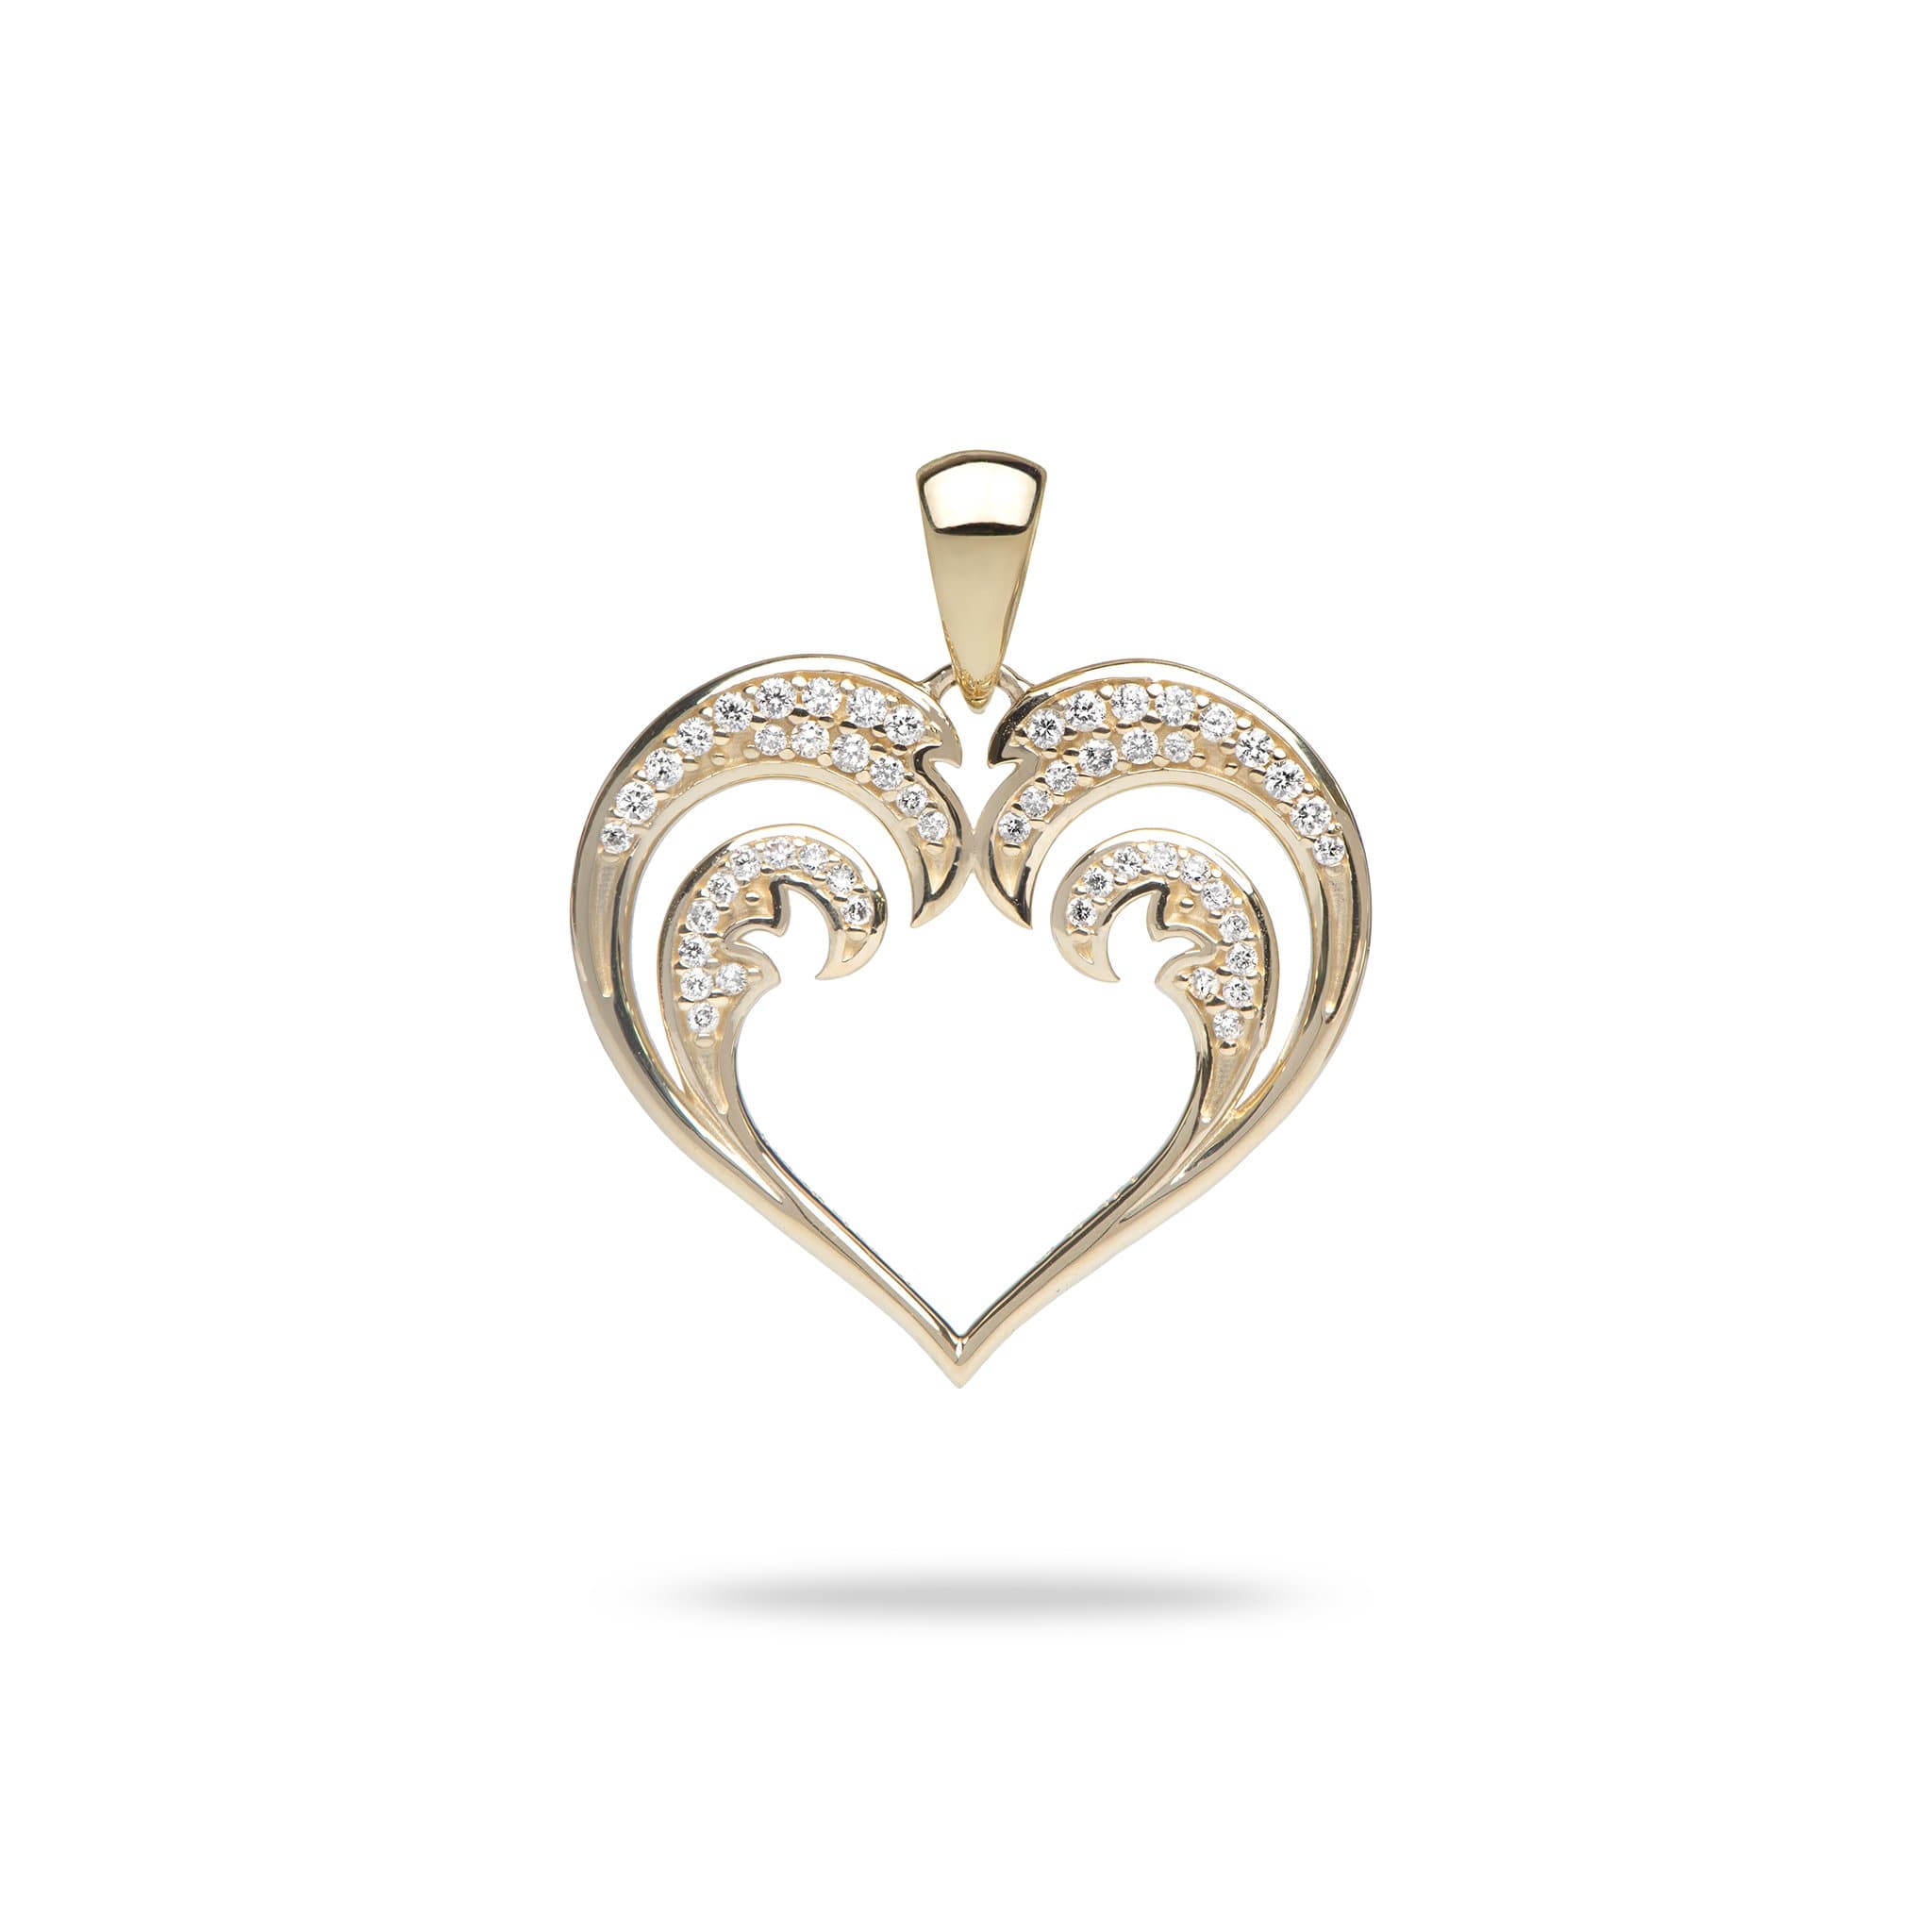 Nalu Heart Pendant with Diamonds in Gold - 20mm-Maui Divers Jewelry